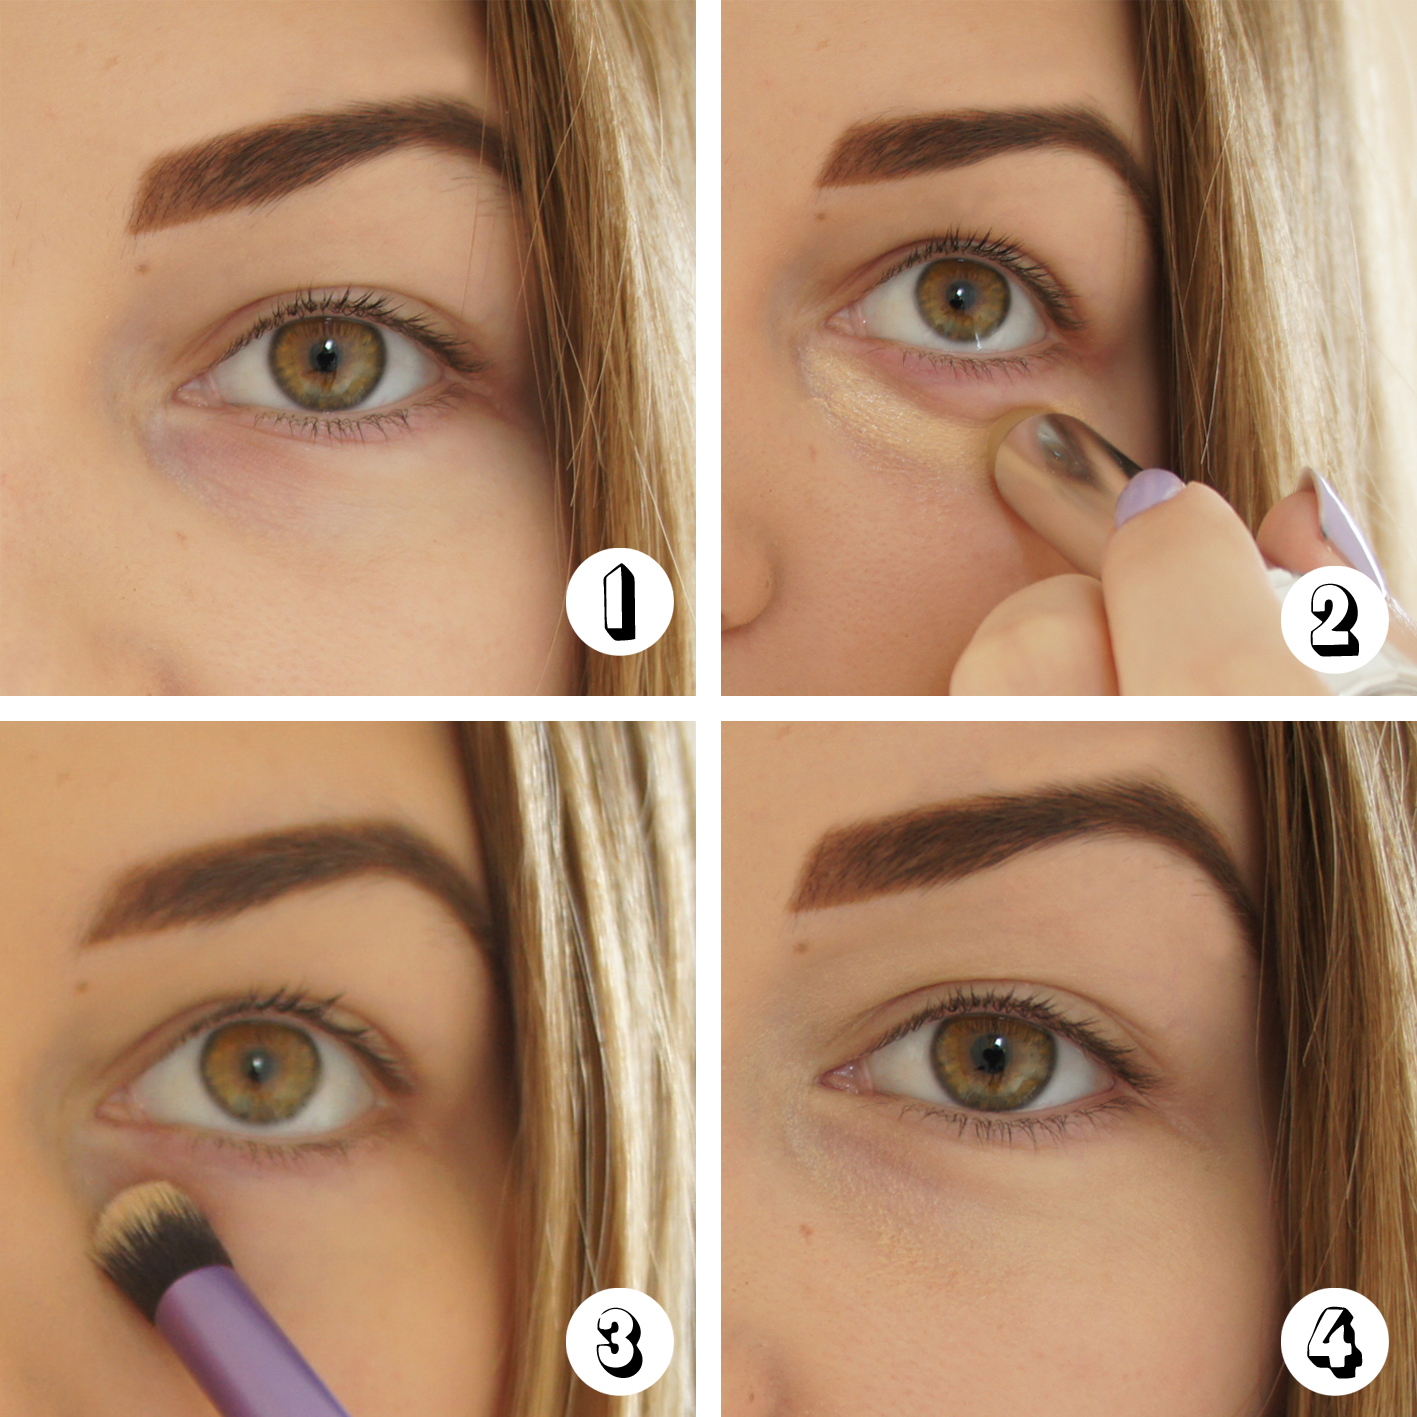 How do you use concealer?